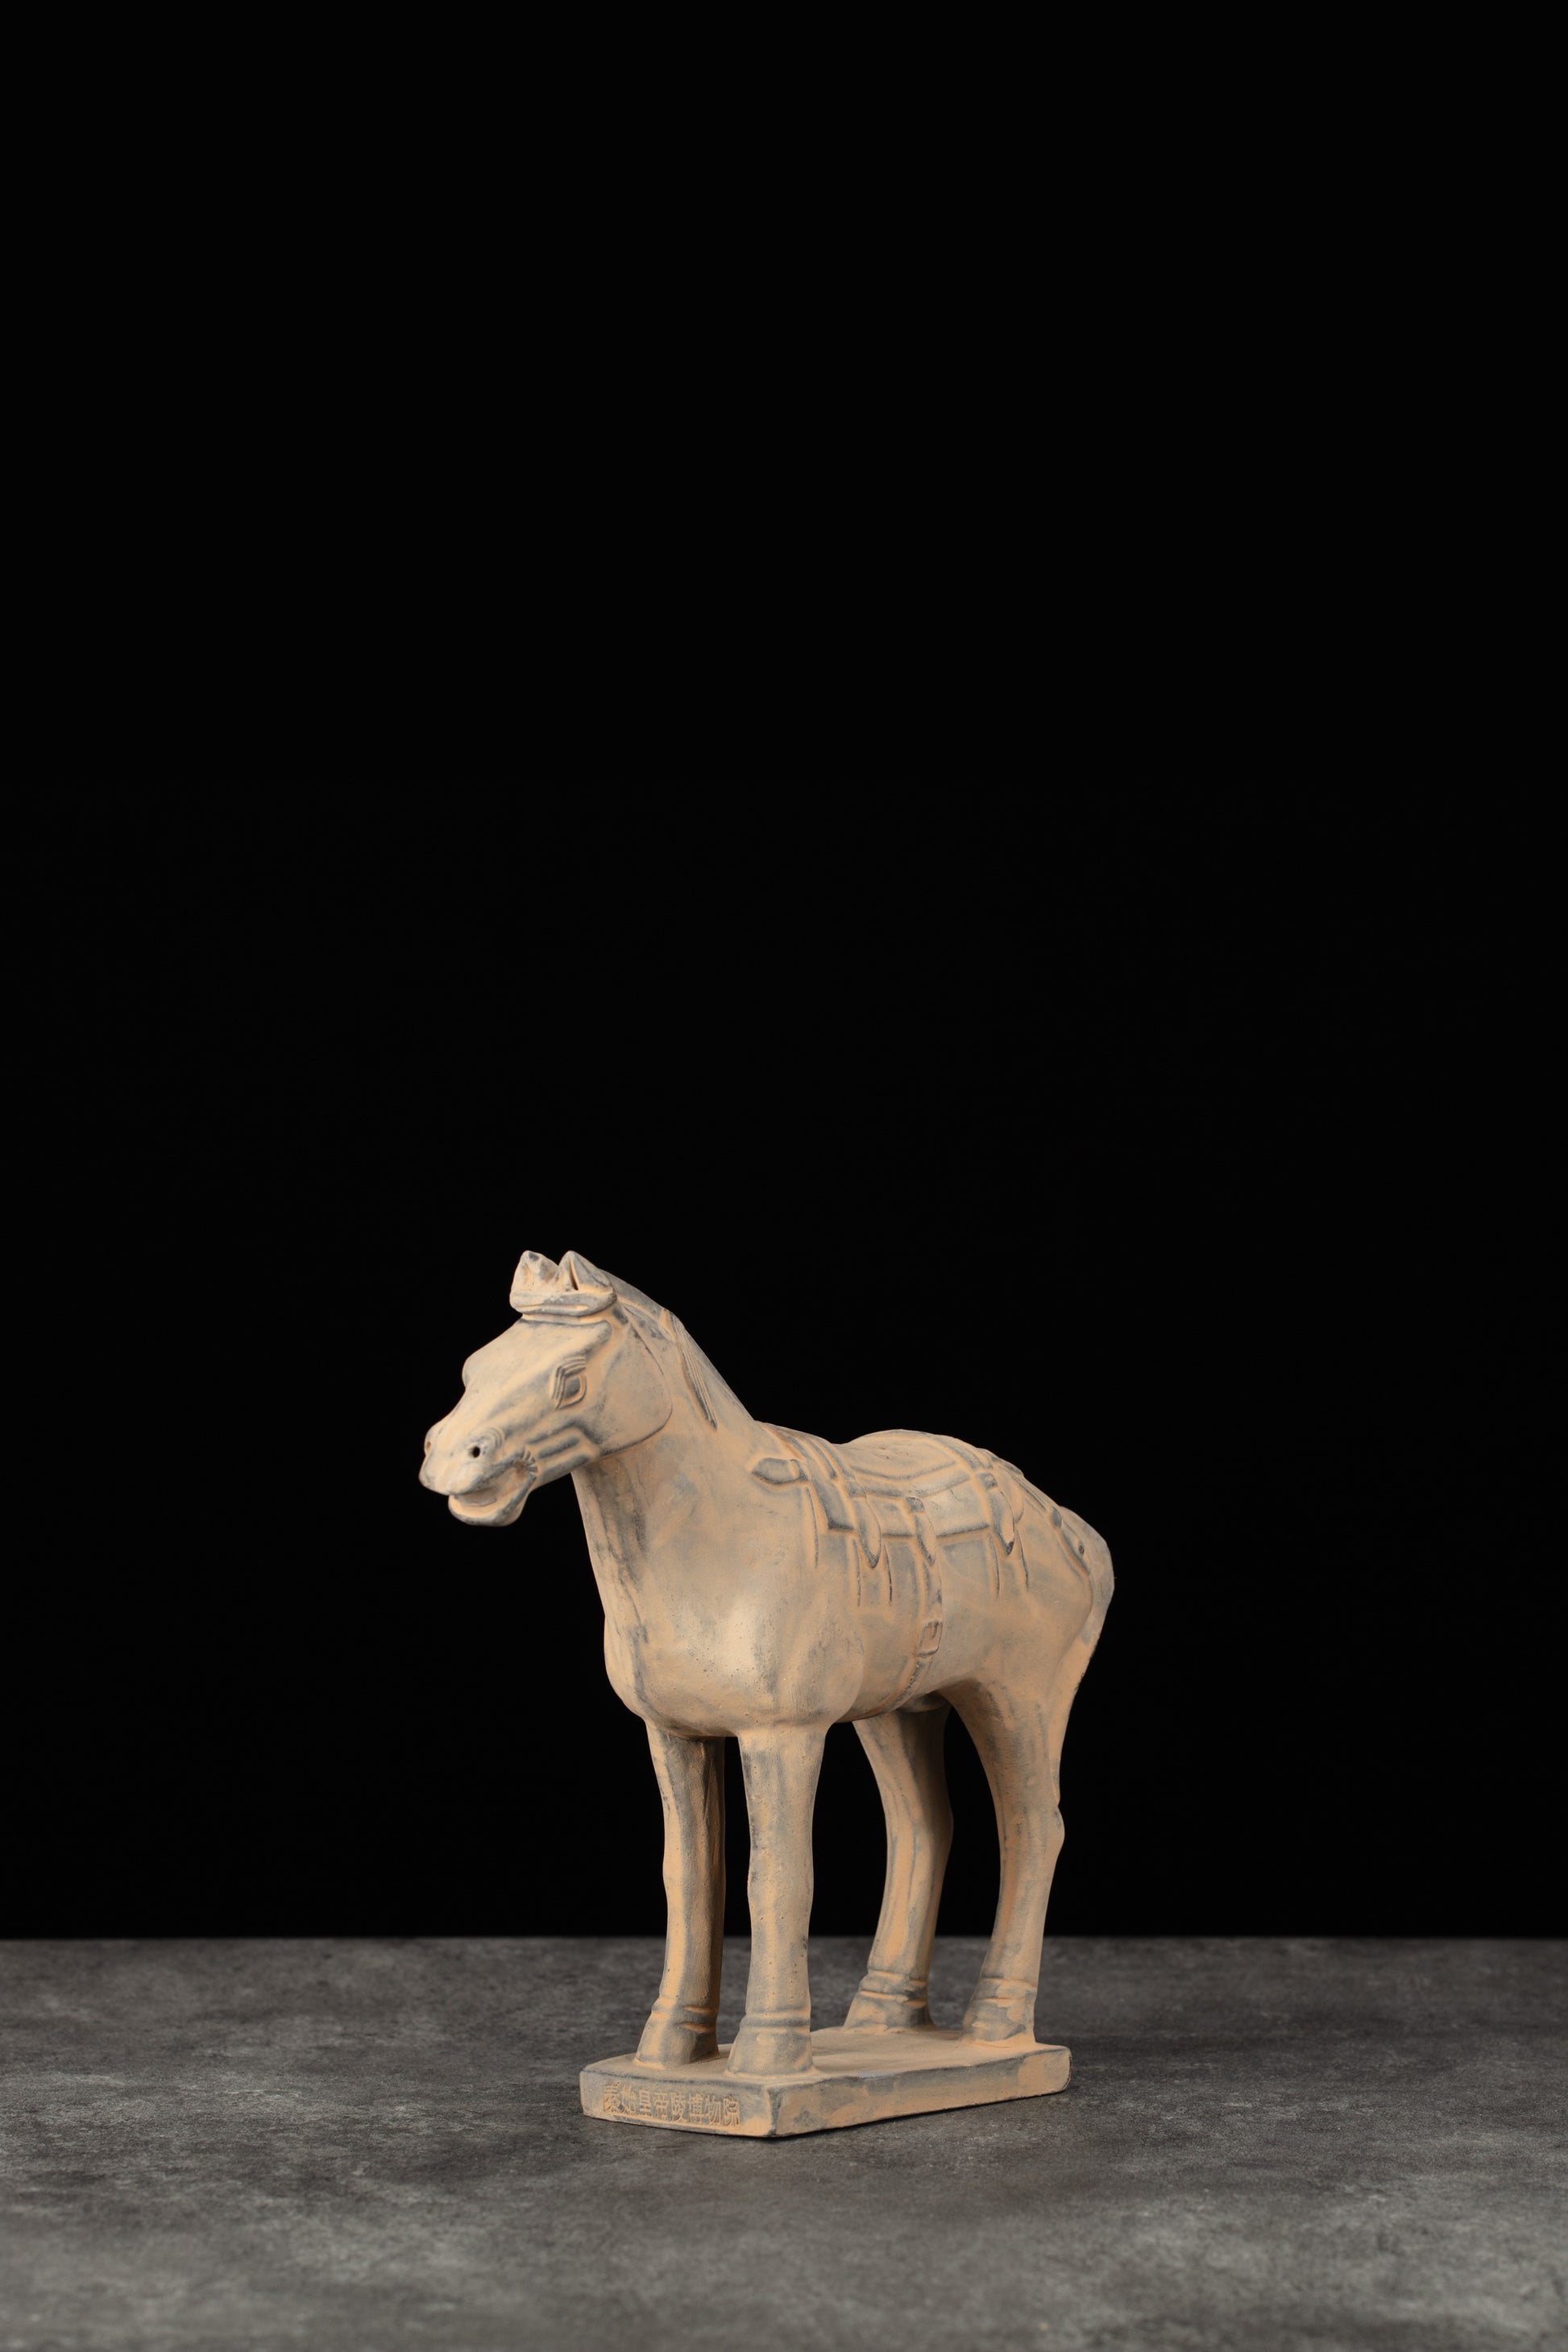 20CM Horse - CLAYARMY -Profile shot emphasizing the majestic posture and proportions of our 20CM Clayarmy Terracotta Horse.